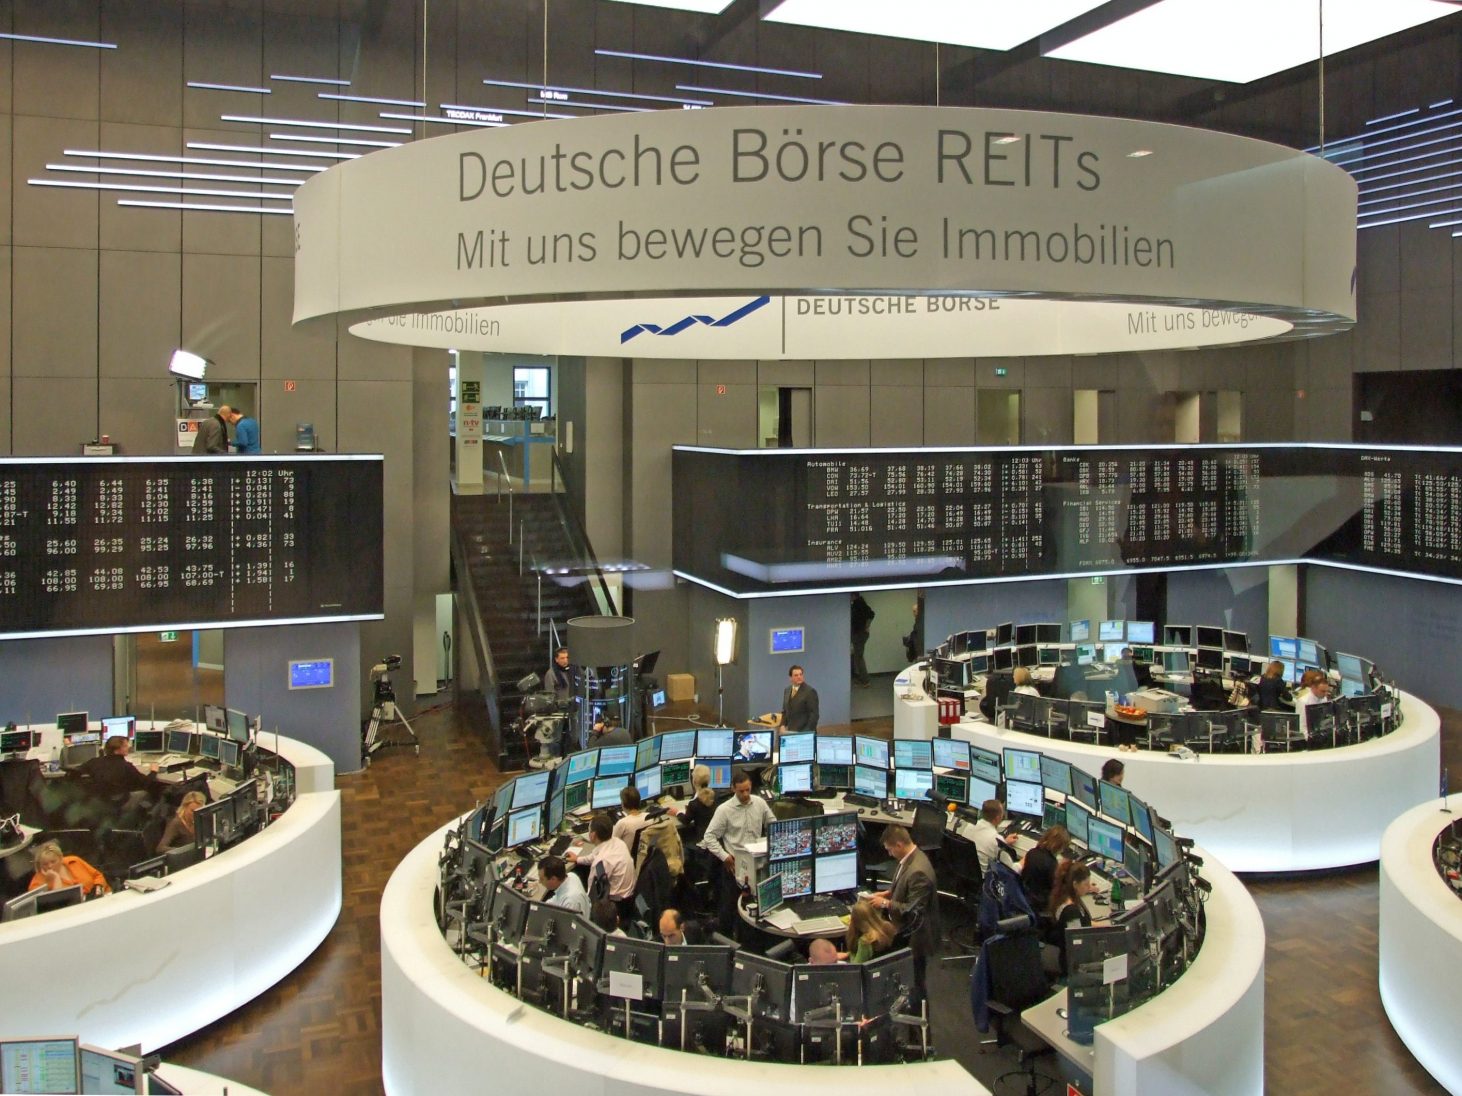 Parkett-Boerse in Ffm. Source: Dontworry/http://bit.ly/3kNRuHP